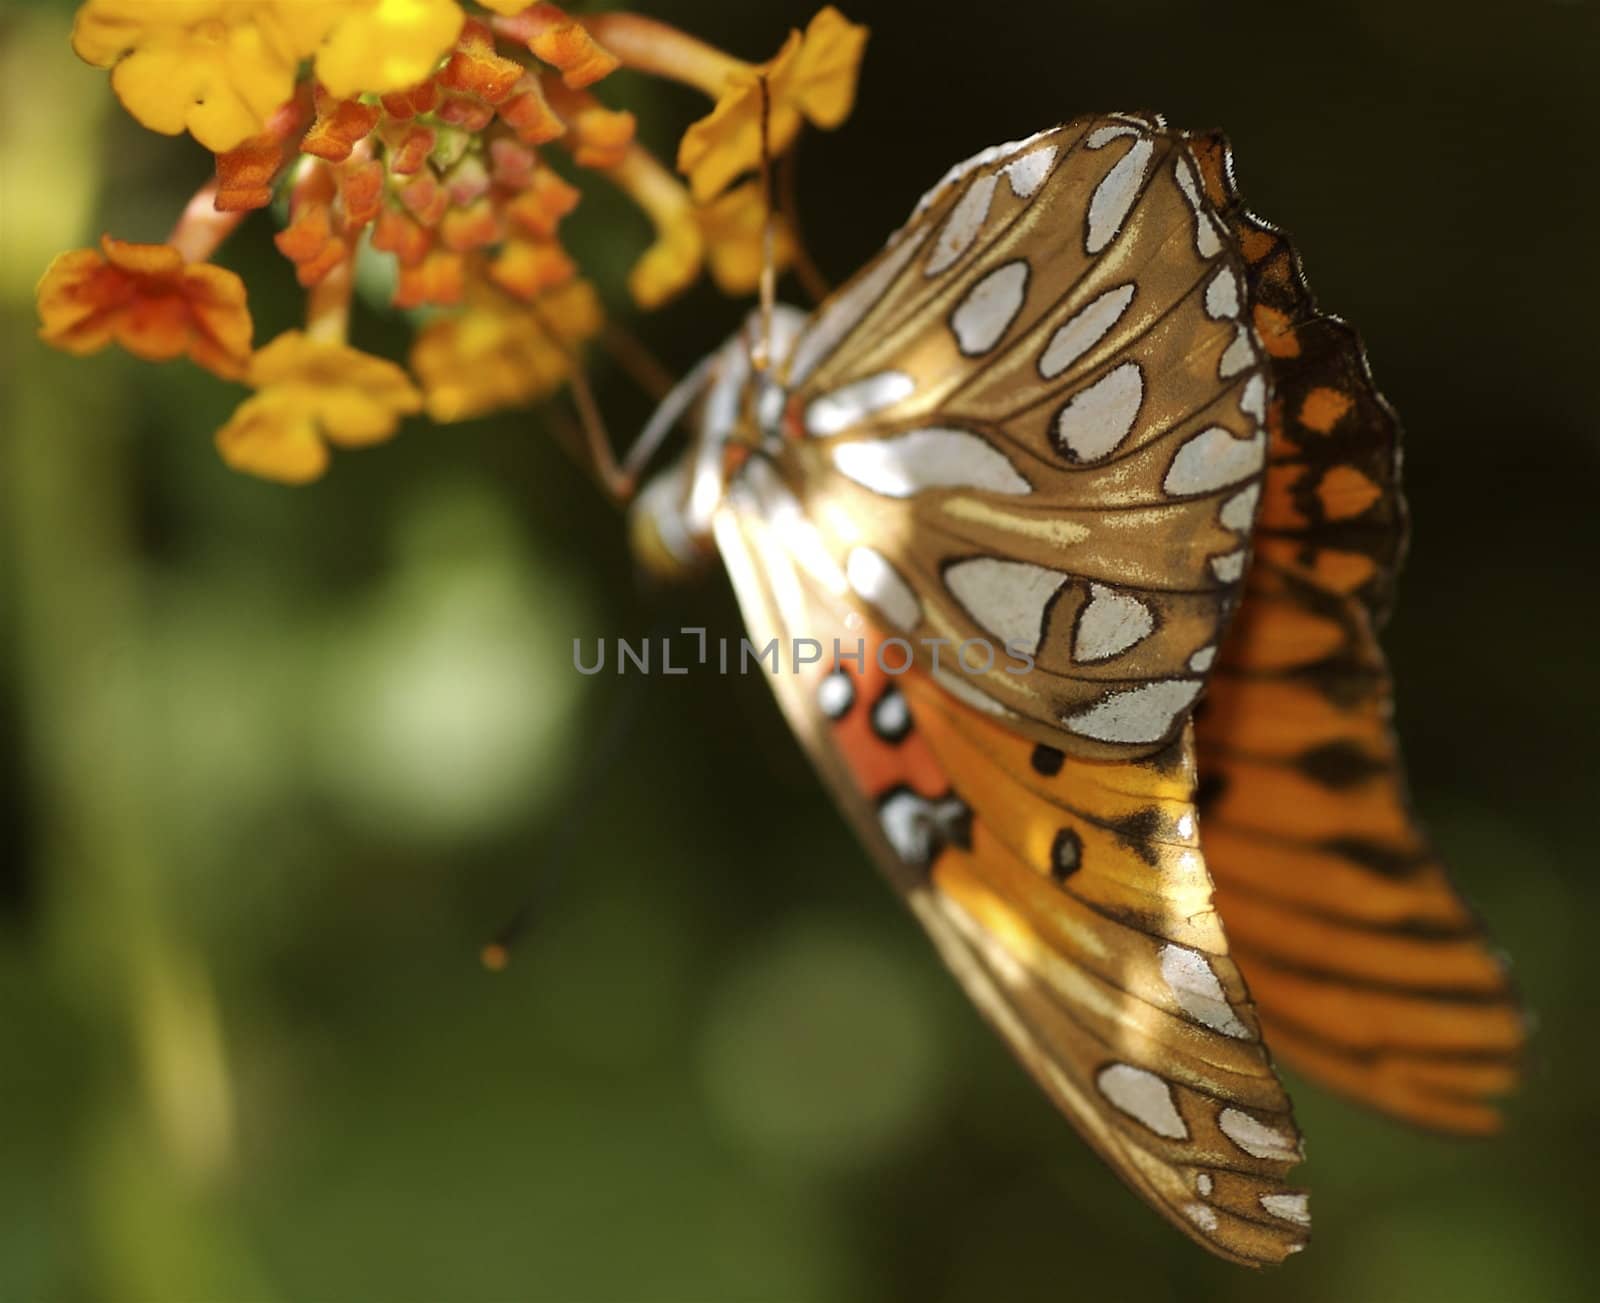 Orange and brown patterned butterfly, landed on the stamen of a yellow desert plant